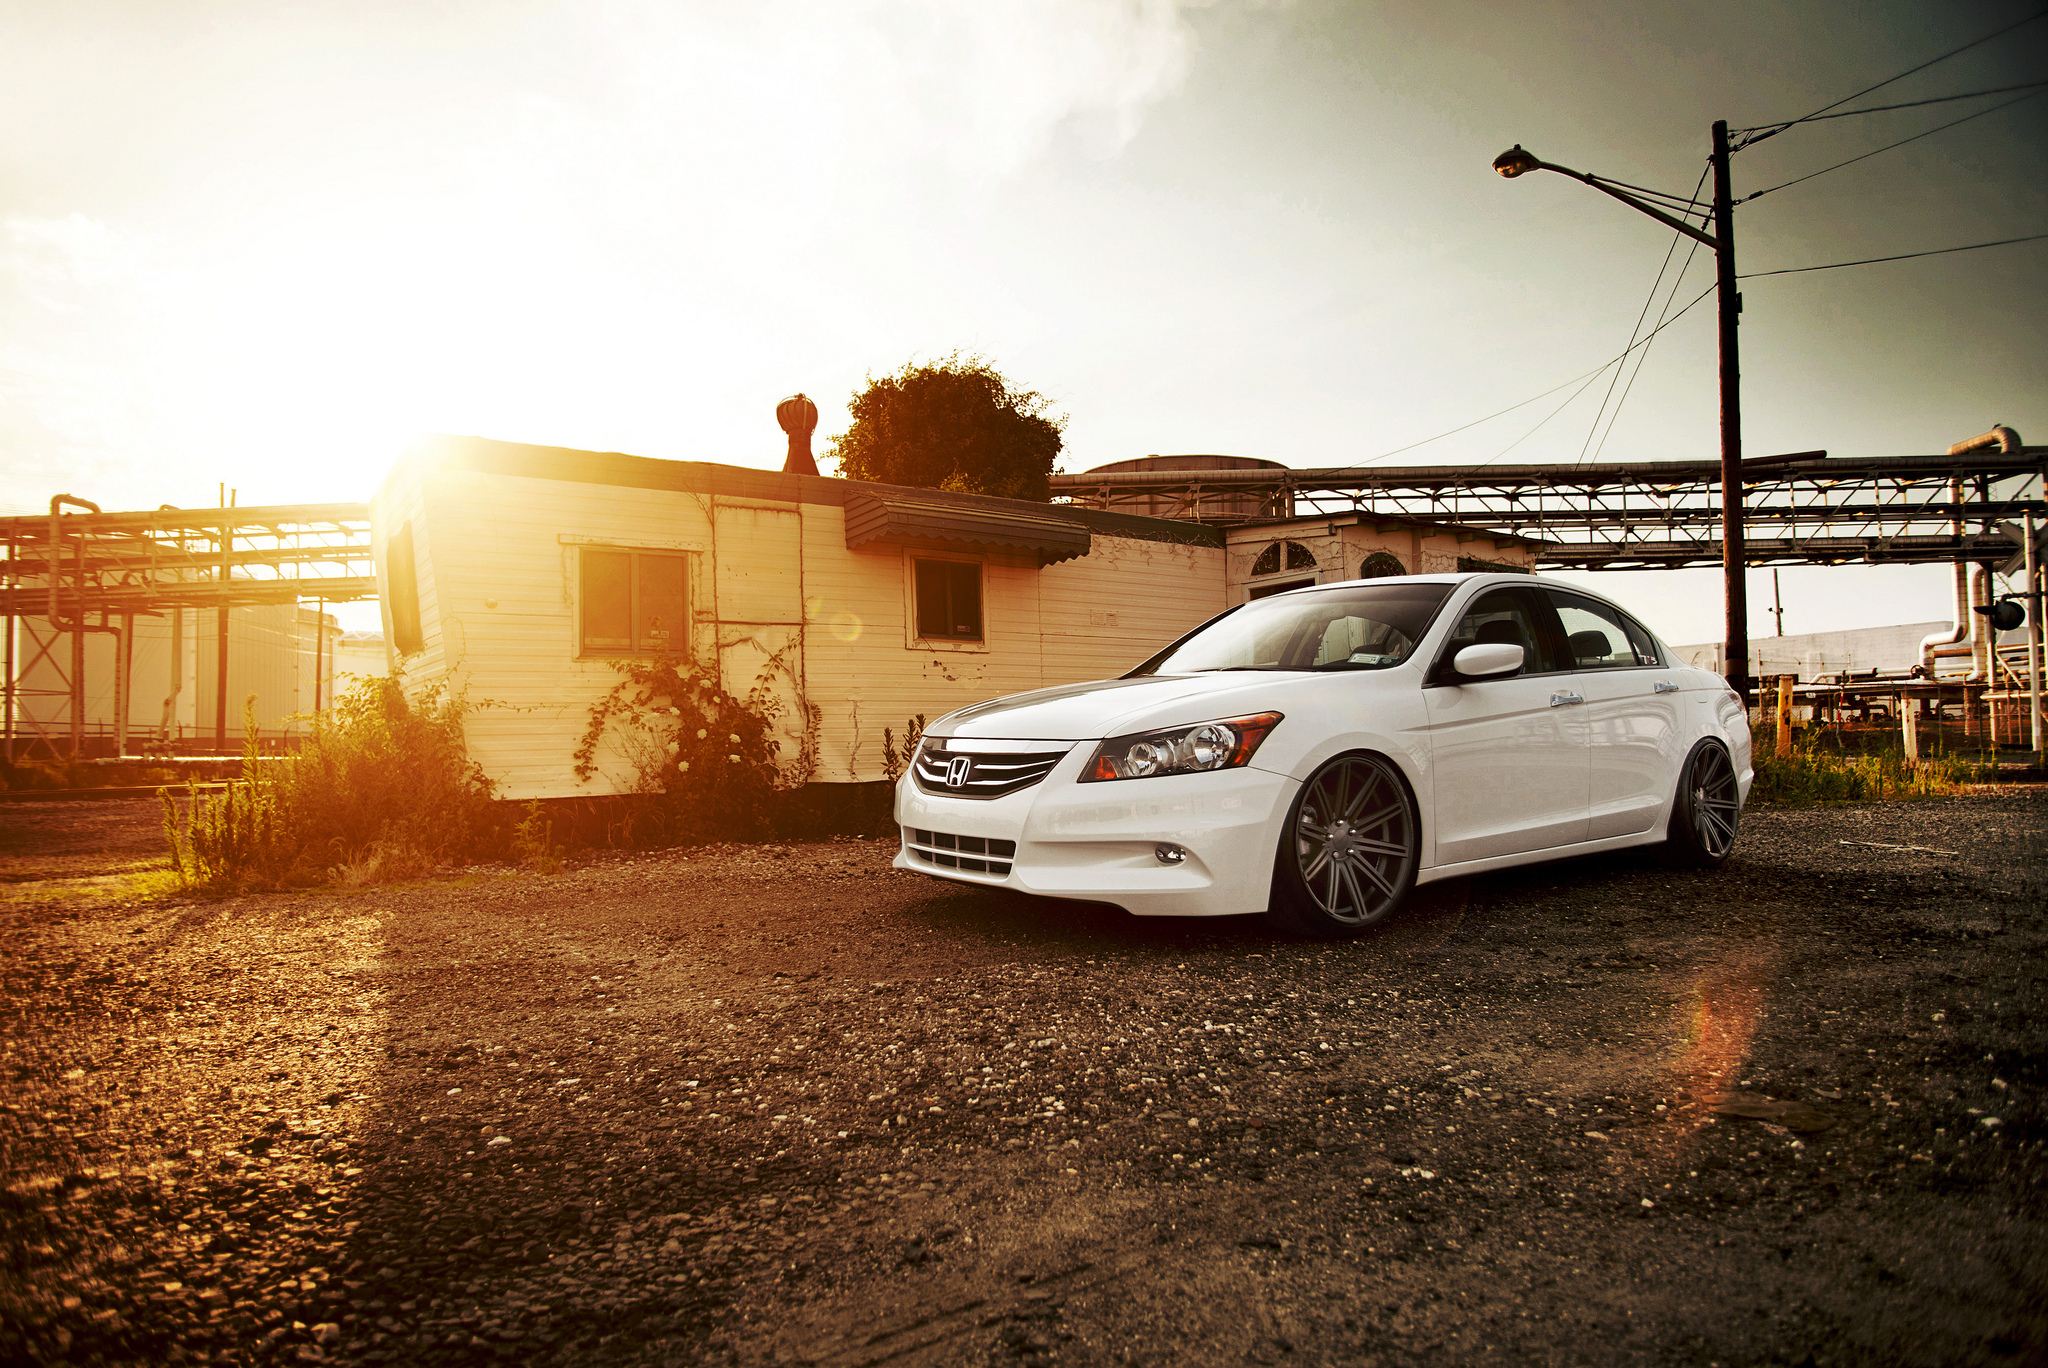 Cool Backgrounds accord, white, vossen, cars Honda